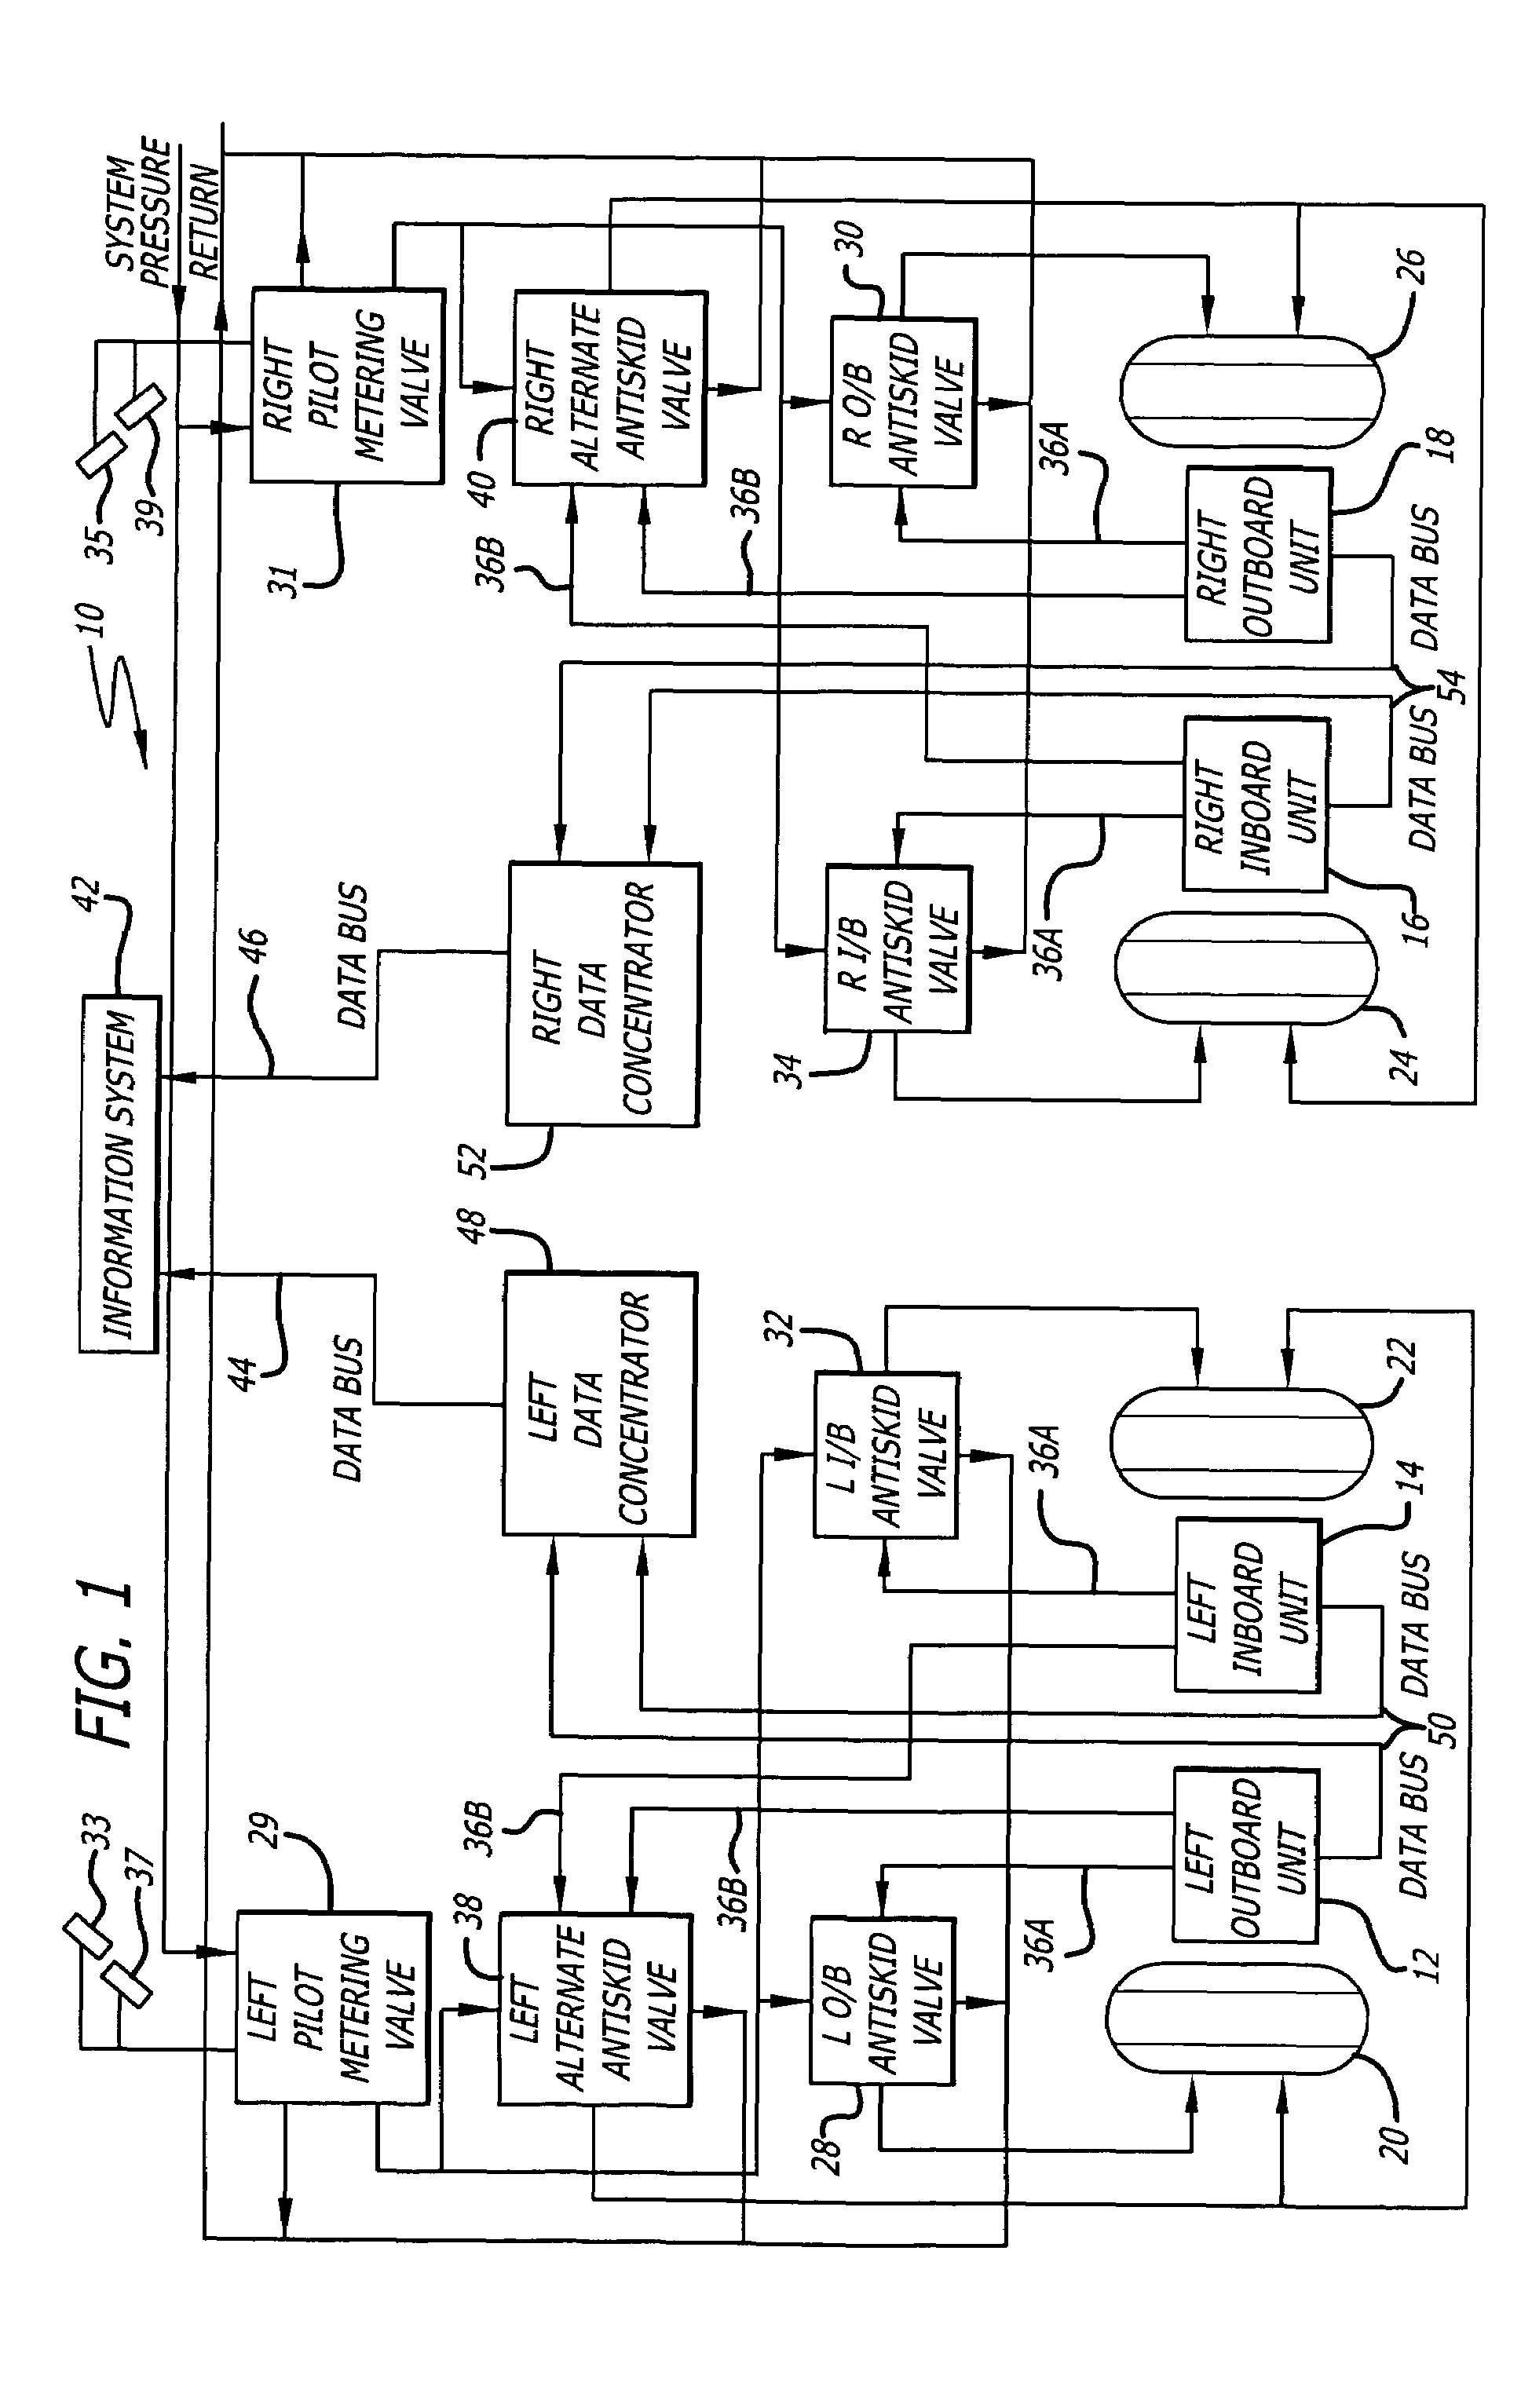 Antiskid control unit and data collection system for vehicle braking system